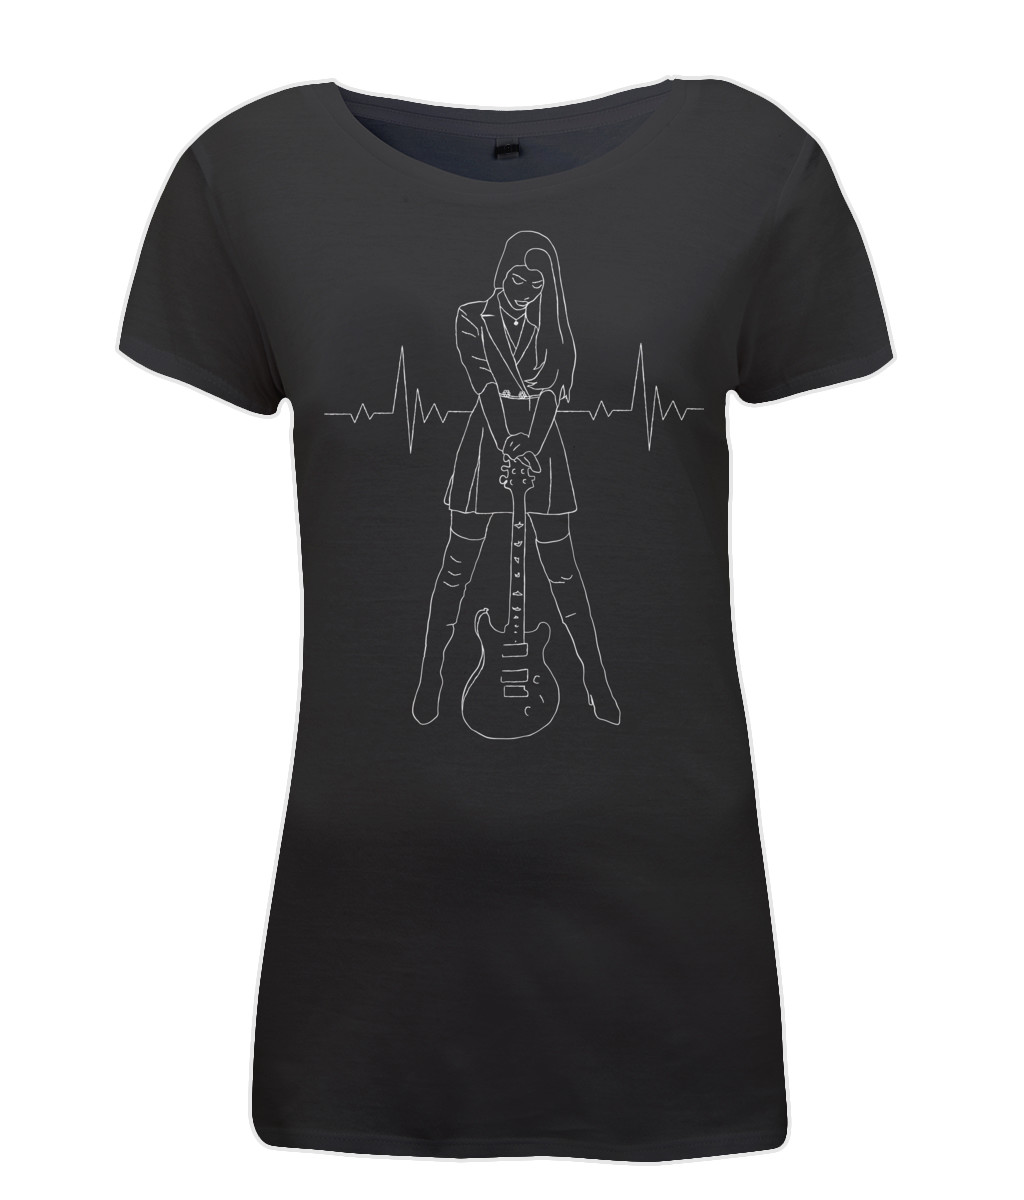 Fitted-cut black t-shirt - Heartbeat